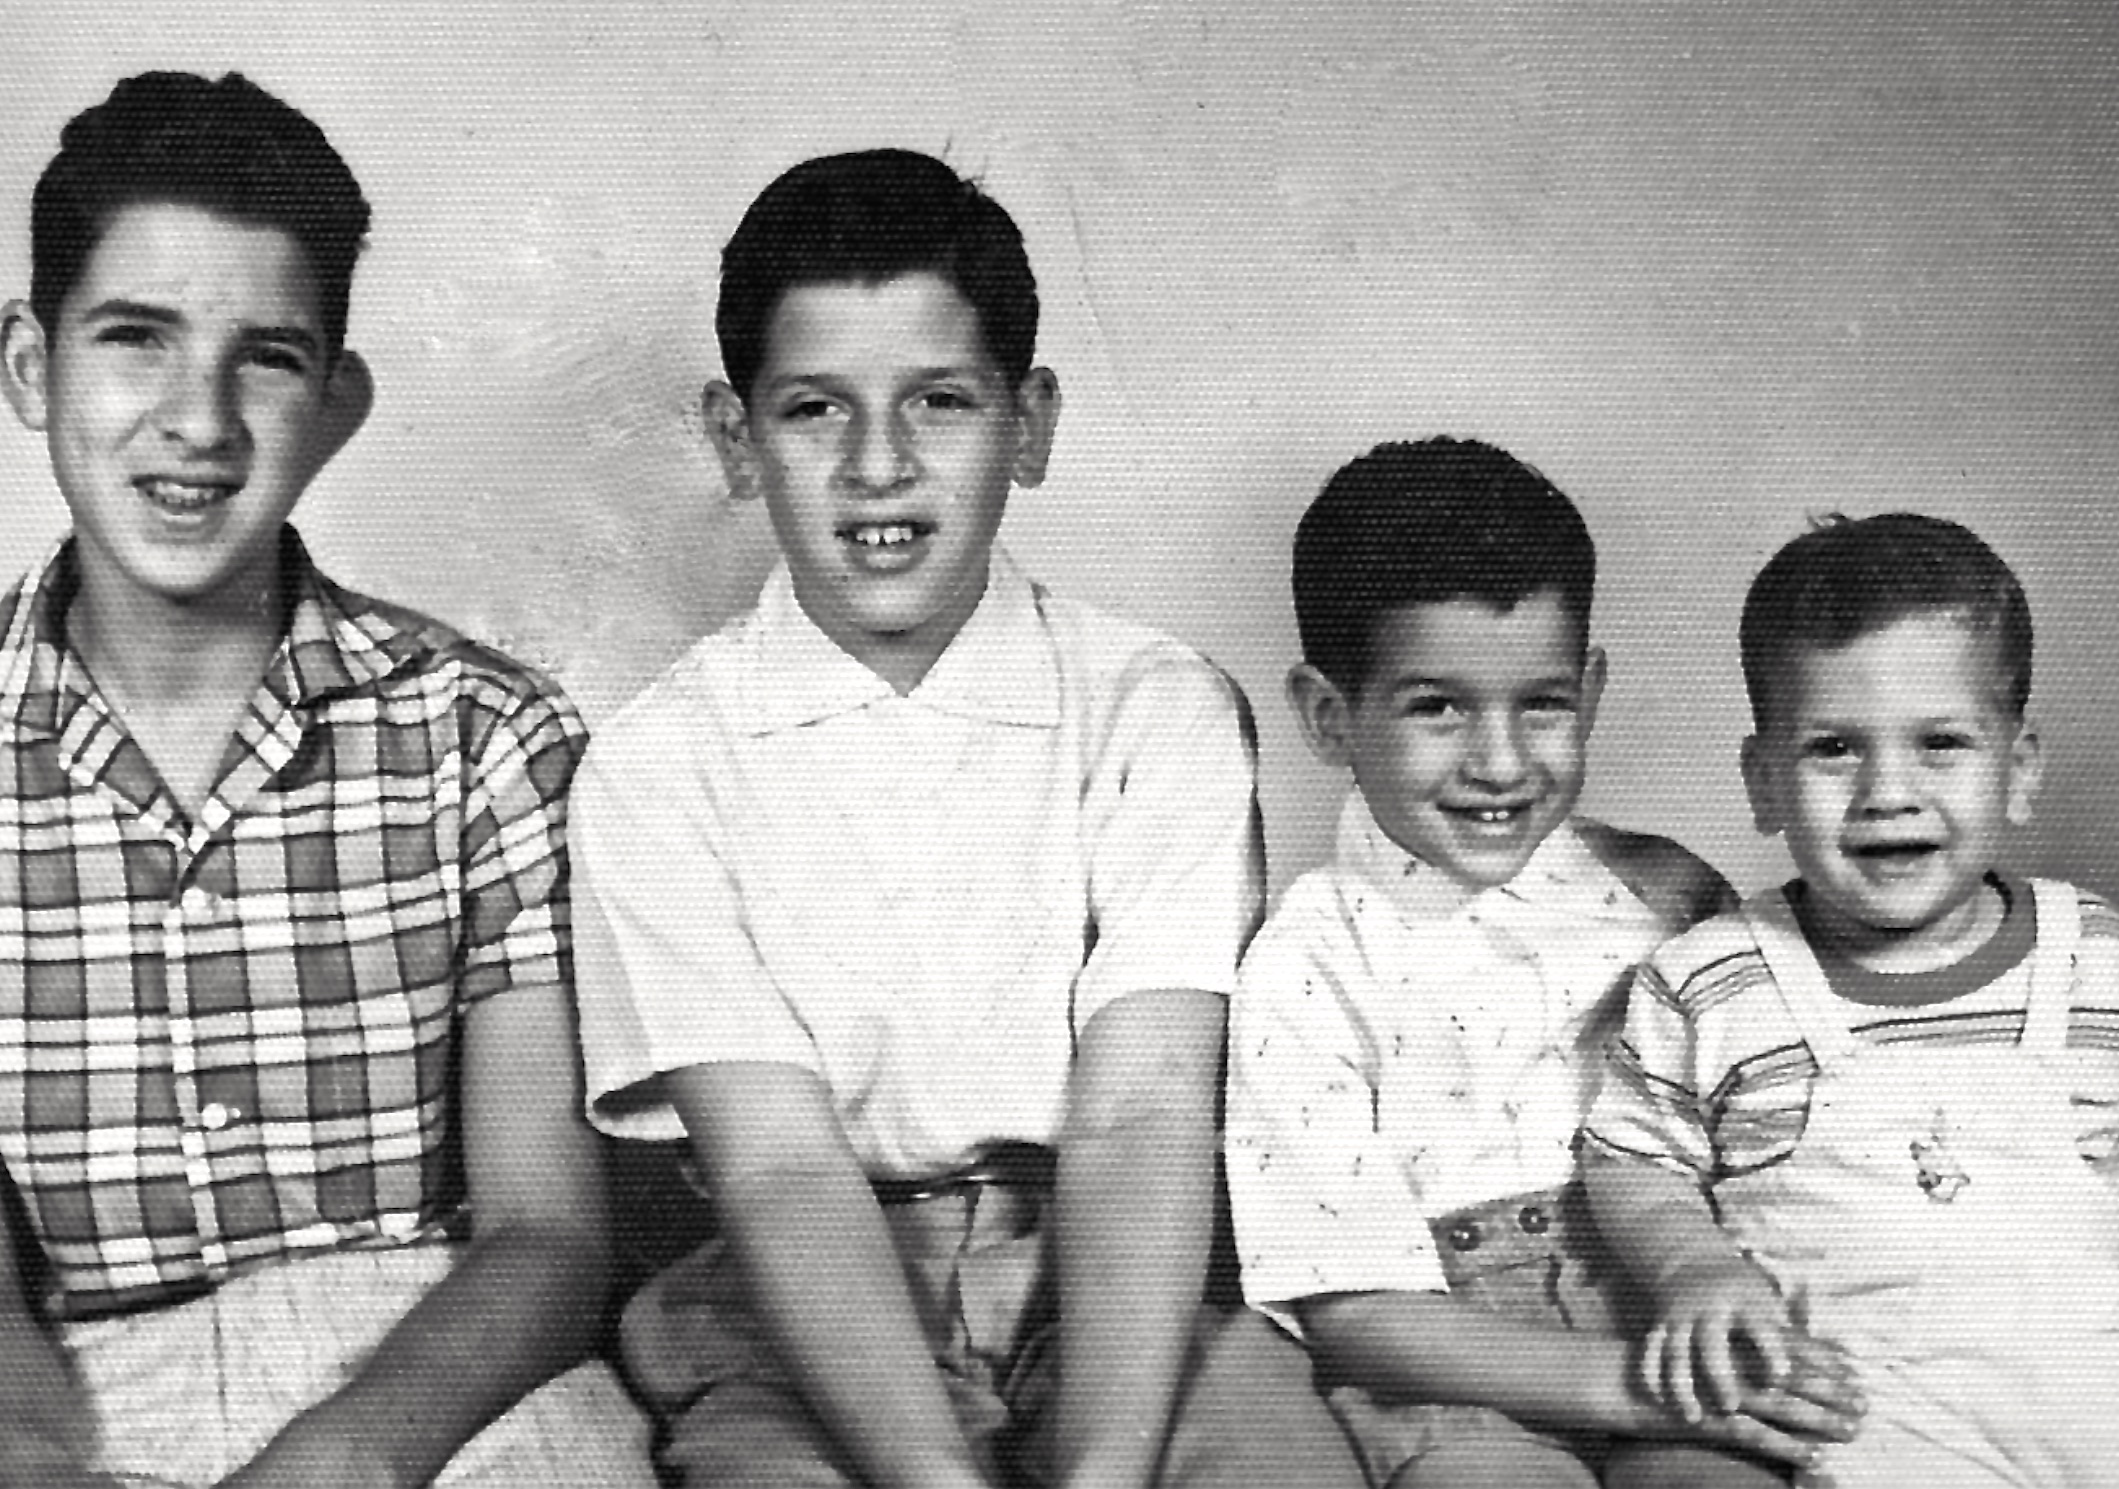 Alan sitting with his three brothers, Los Angeles, CA, 1956. L-R: Gary (age 14), Alan (age 11), David (age 4), and Howard (age 1).